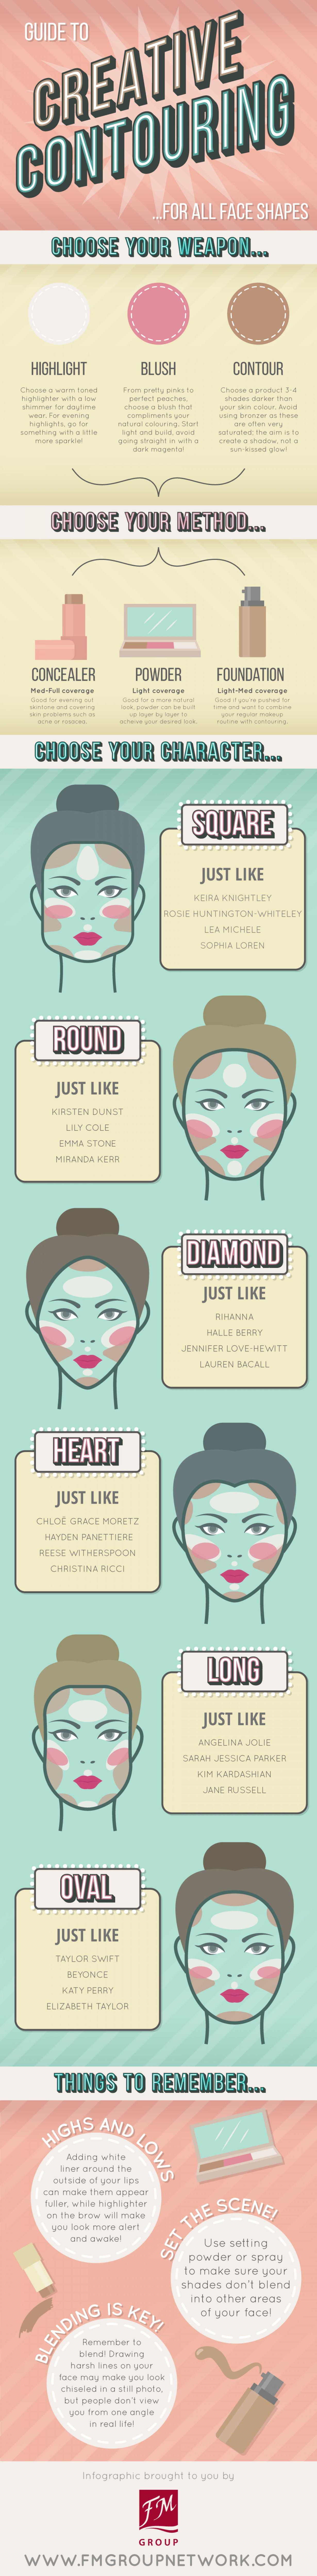 A Guide To Creative Contouring